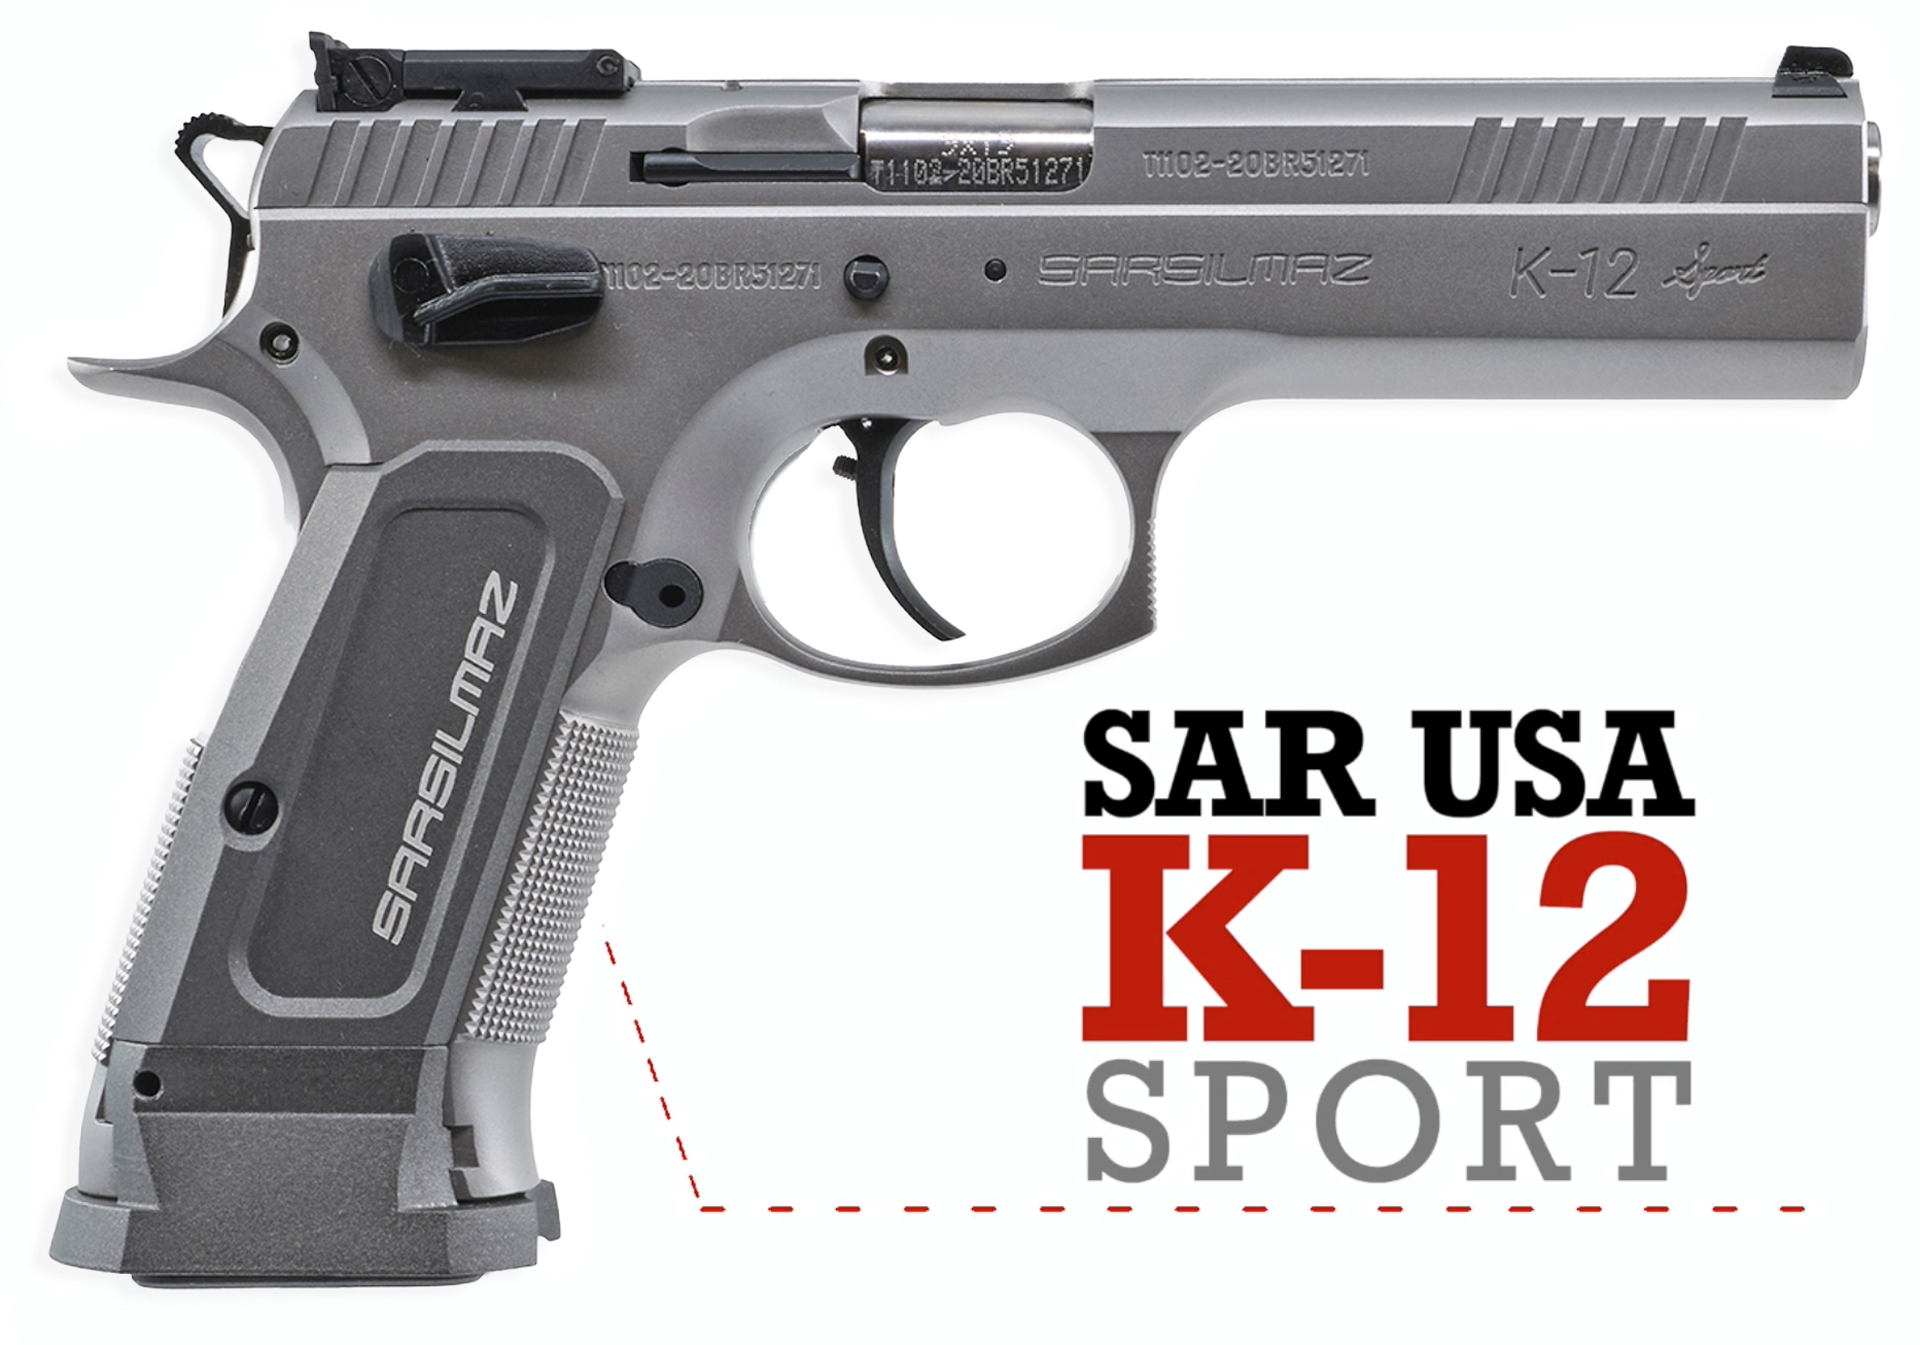 gun right side gray color steel stainless text on image noting make and model SAR USA K12 Sport